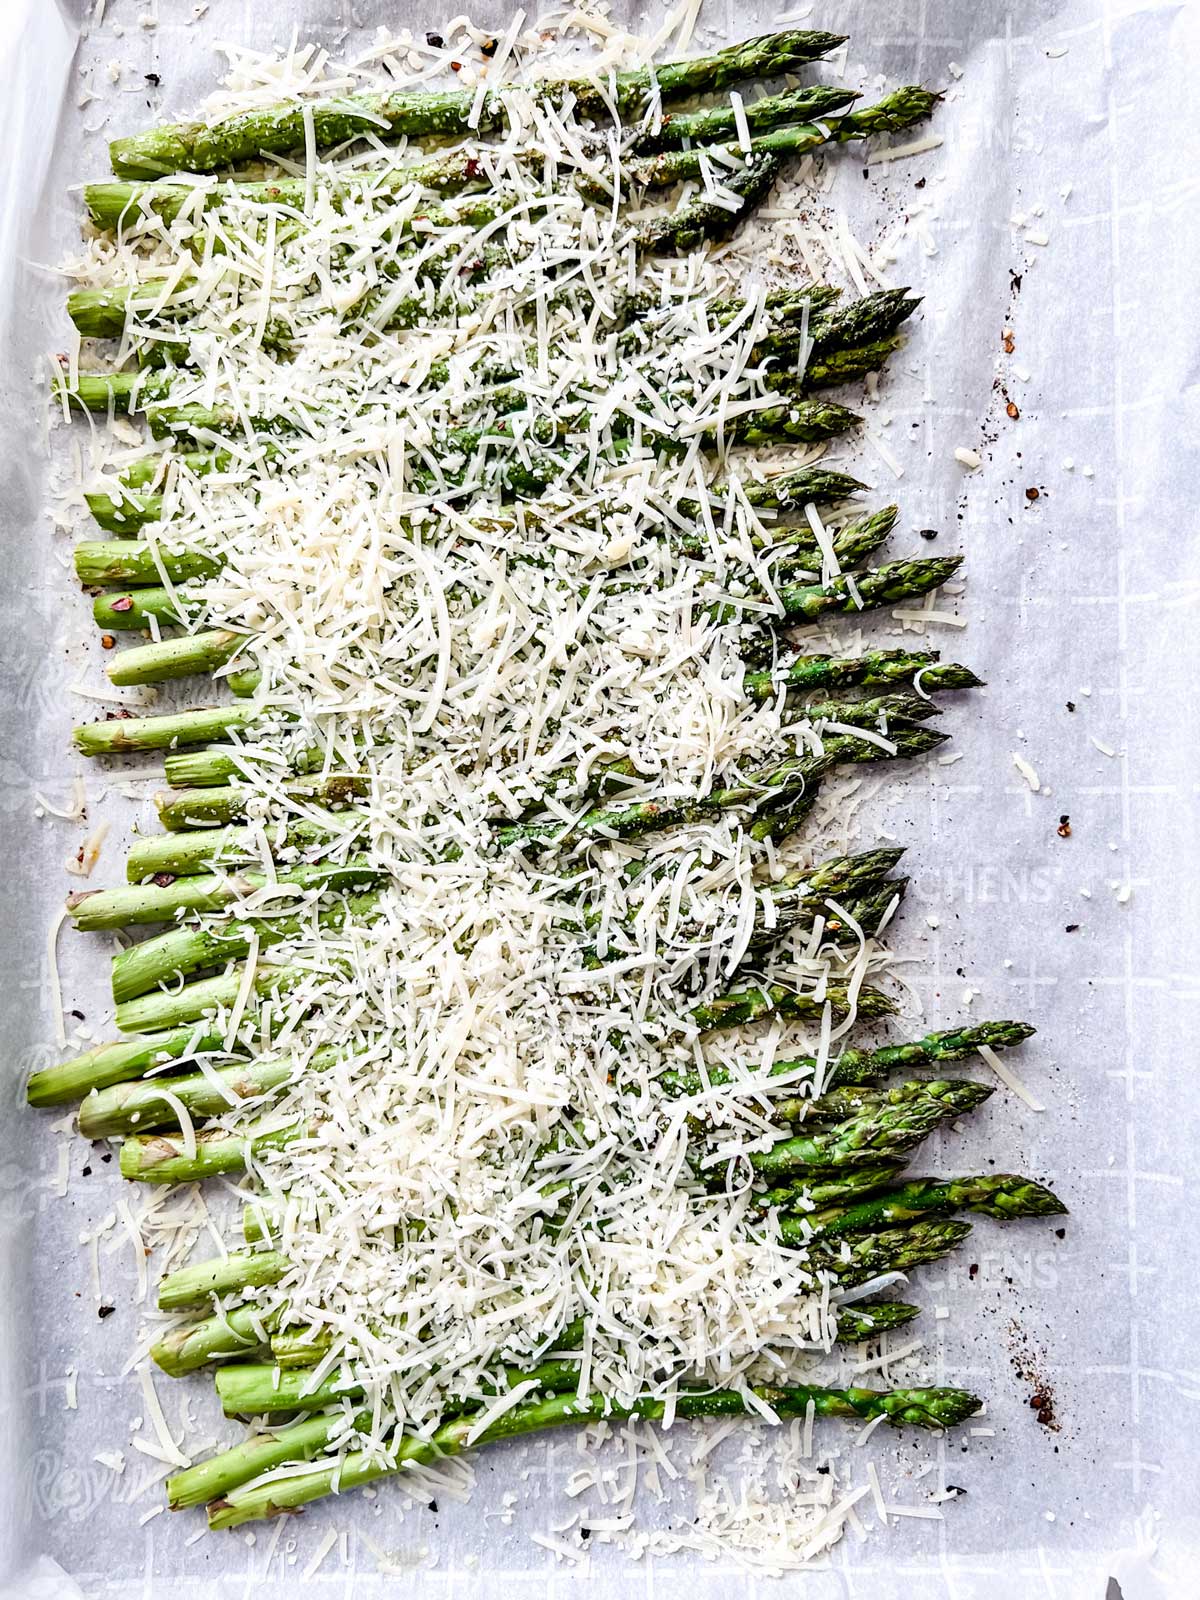 Partially cooked asparagus with parmesan sprinkled on top of it.